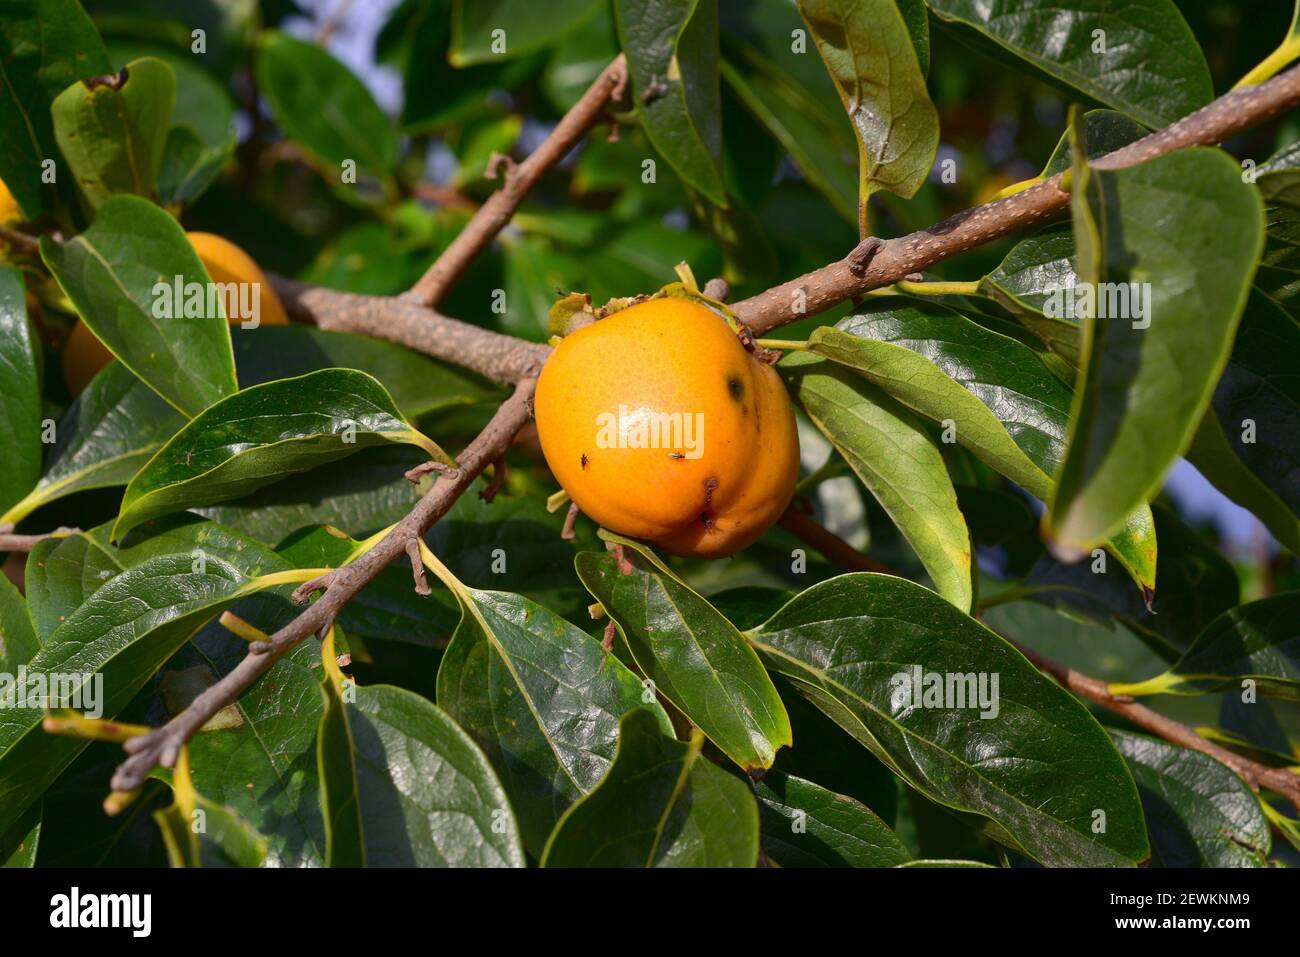 Chinese persimmon or oriental persimmon (Diospyros kaki) is a deciduous tree native to Asia and widely cultivated for its edible fruits. This photo Stock Photo